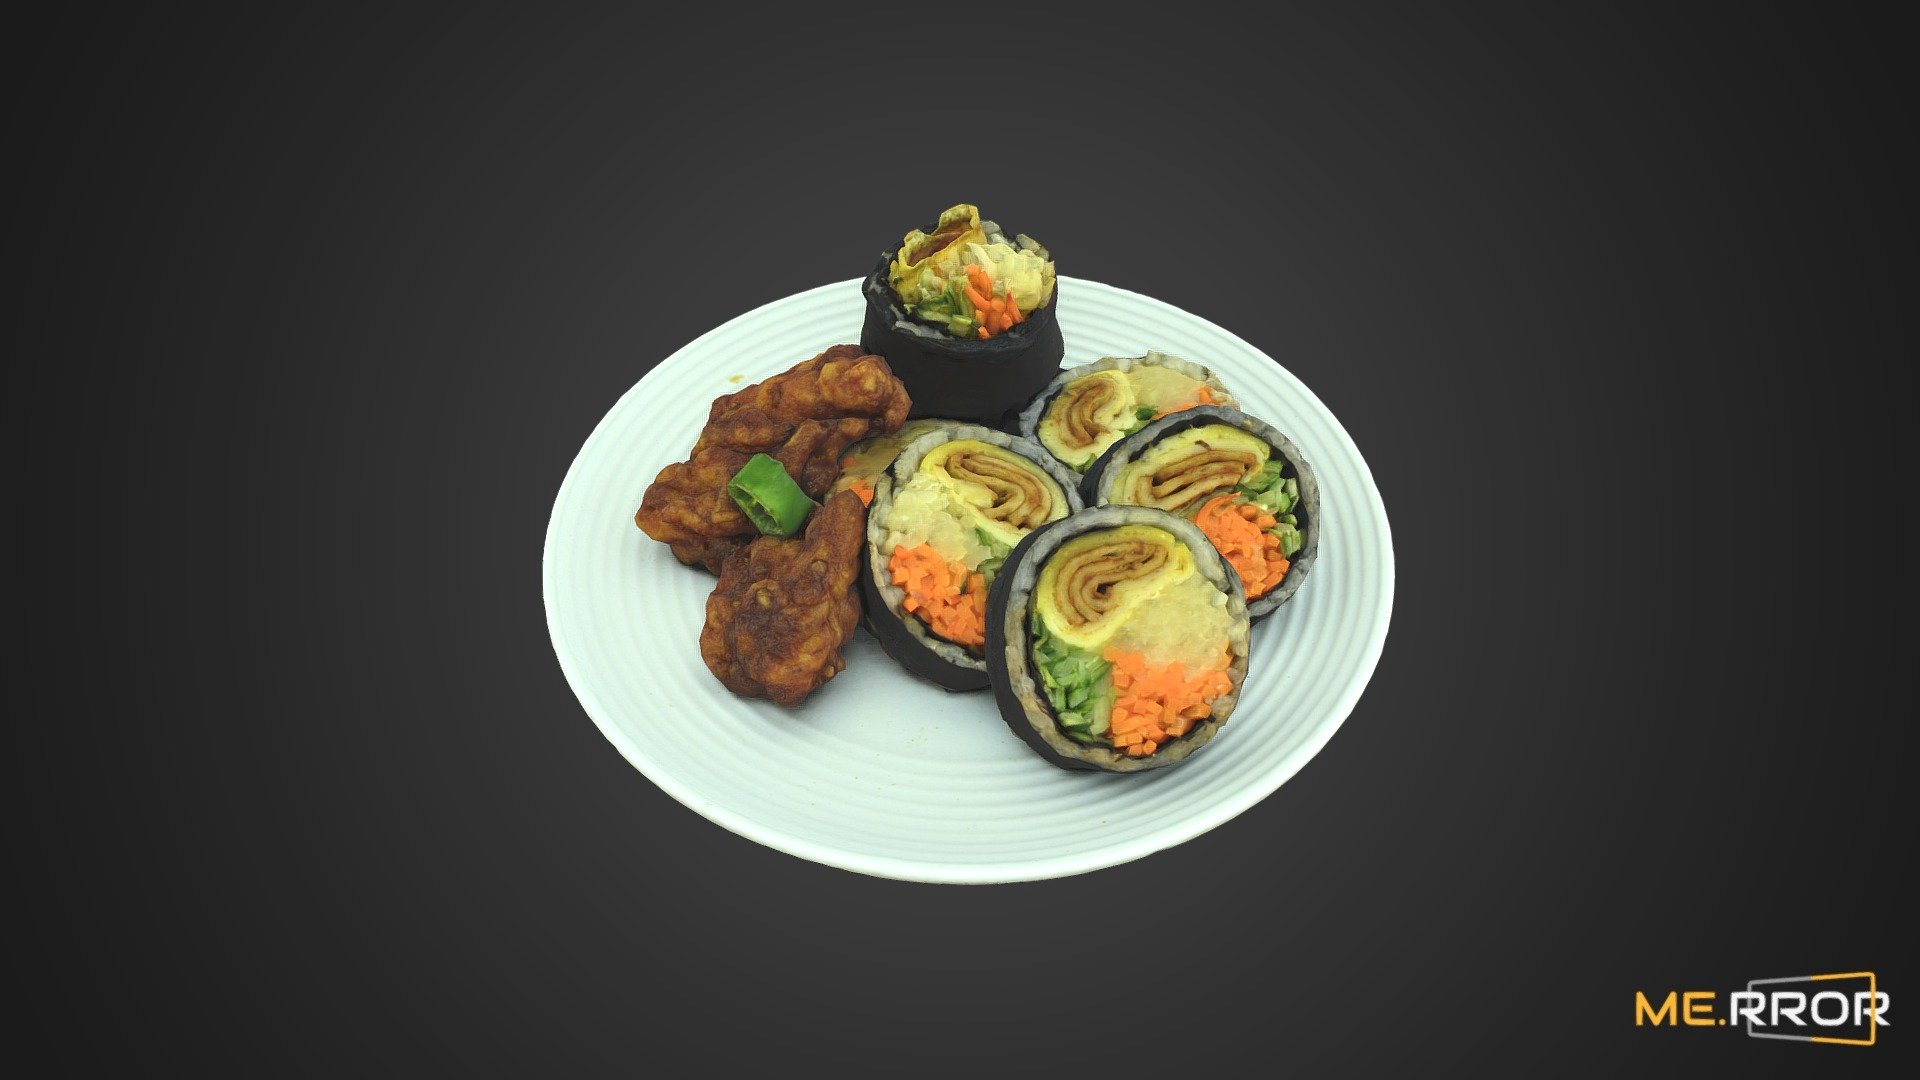 MERROR is a 3D Content PLATFORM which introduces various Asian assets to the 3D world

#3DScanning #Photogrametry #ME.RROR - Korean dish Rice roll Gimbap and Chicken - Buy Royalty Free 3D model by ME.RROR Studio (@merror) 3d model